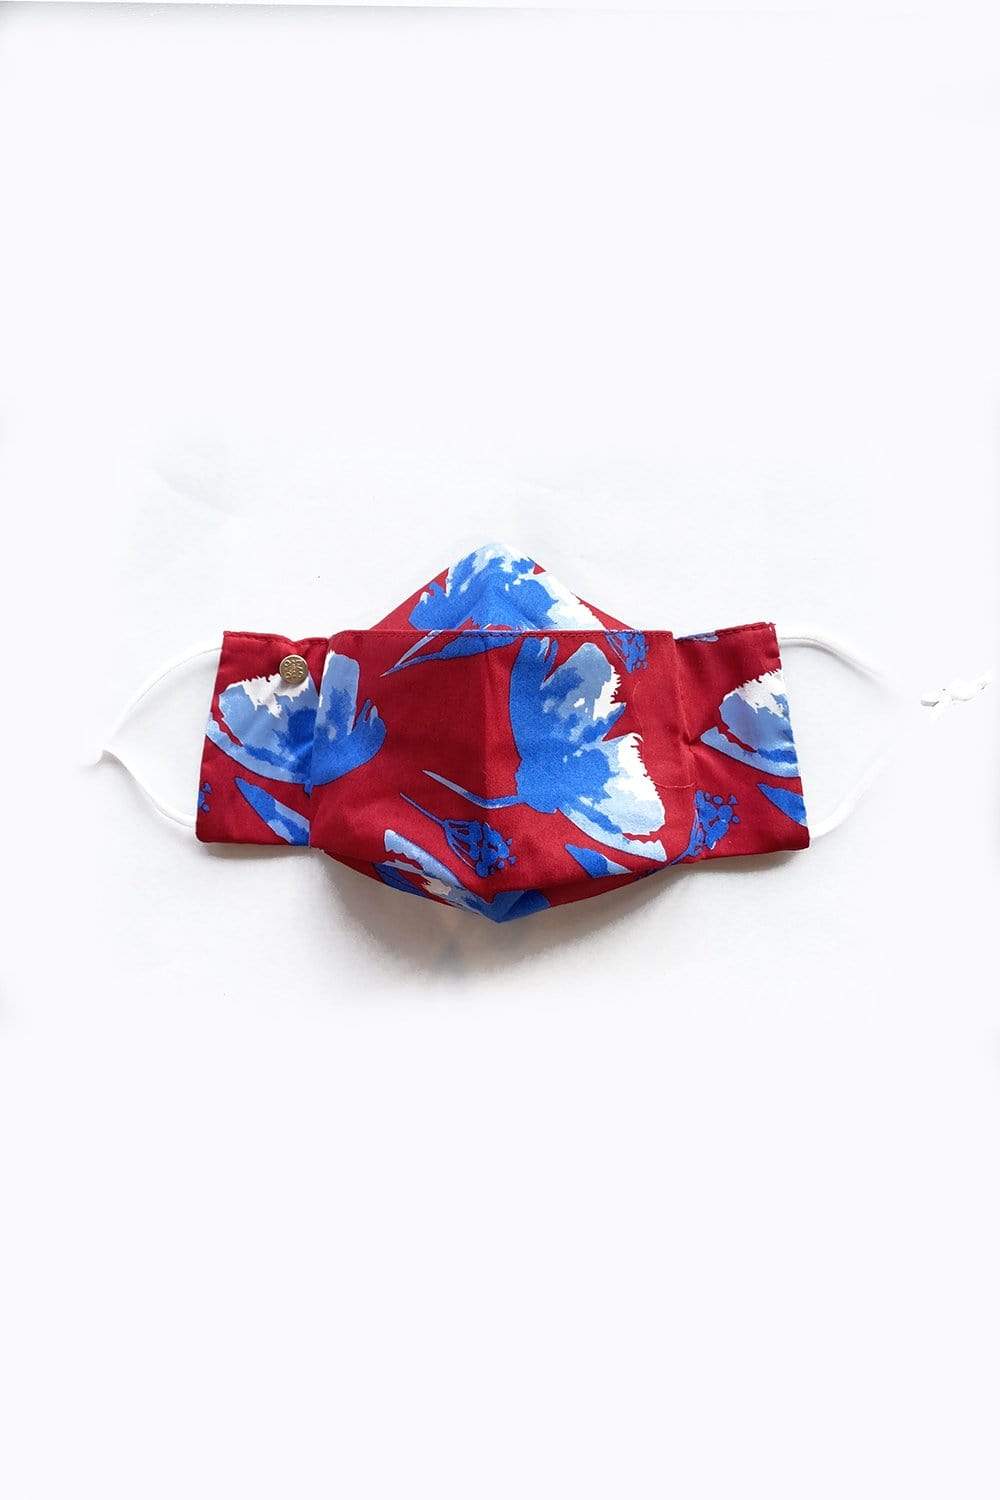 Box Pleated Face Masks Heavenly Blue on Red (Box Pleated Mask with Filter Pocket) - Chloe Dao